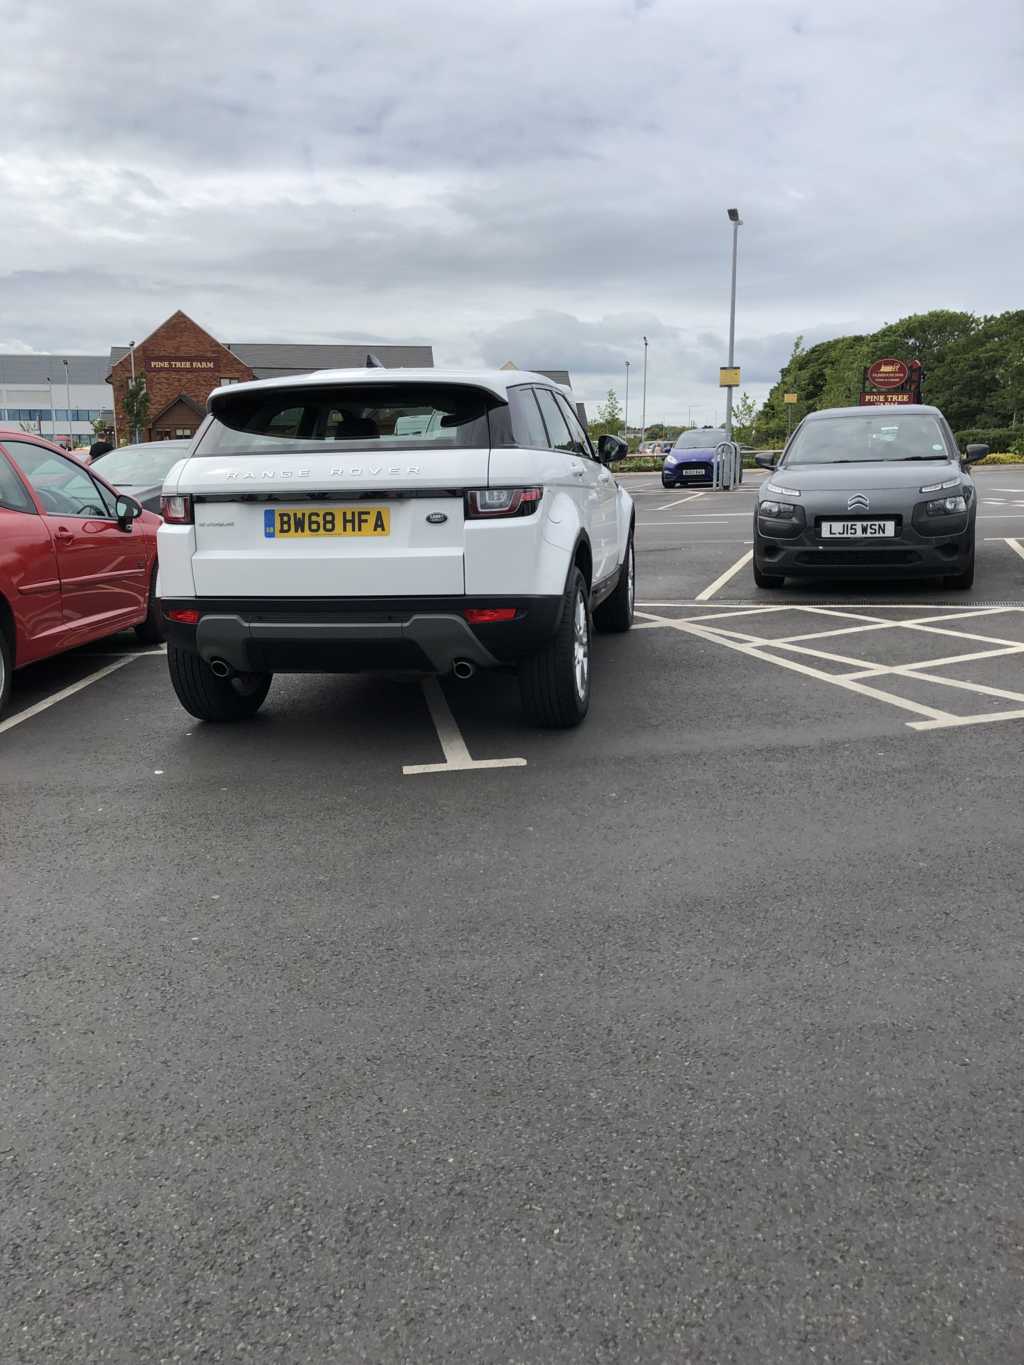 BW68 HFA is a Selfish Parker